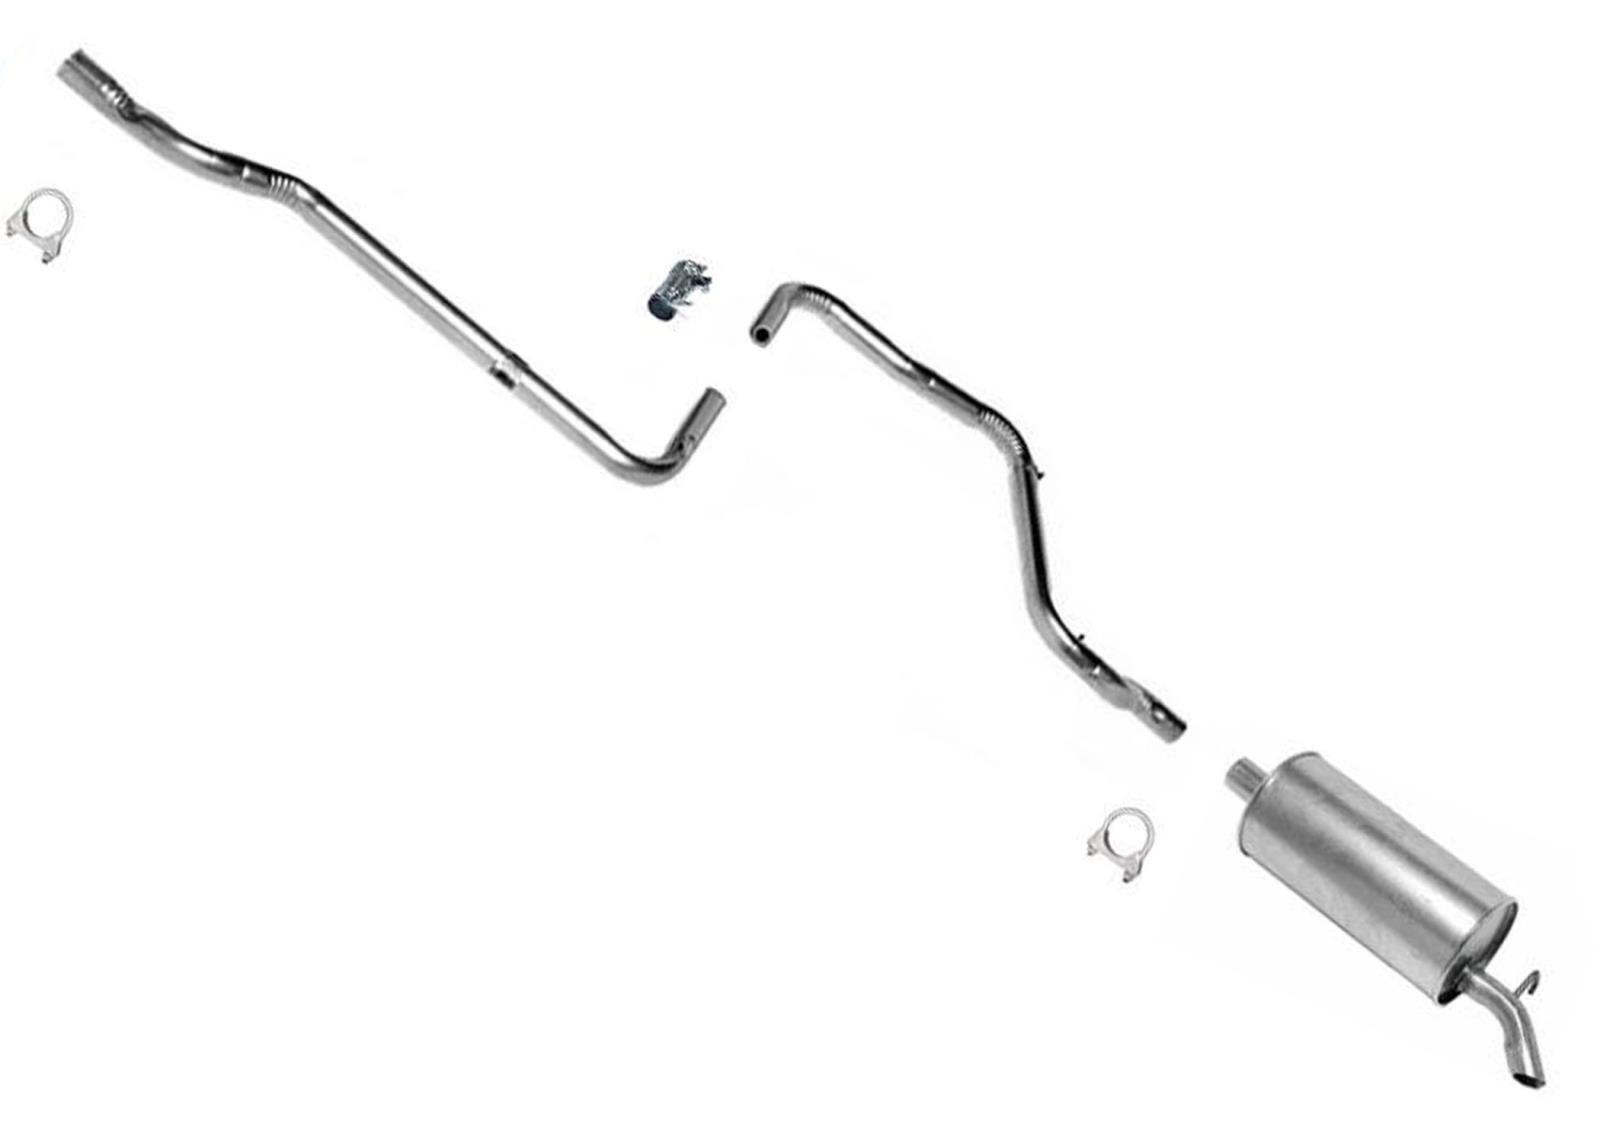 Muffler Exhaust System for Ford Tempo 1984-94 2.3L 3.0L FWD 8B1117 700016